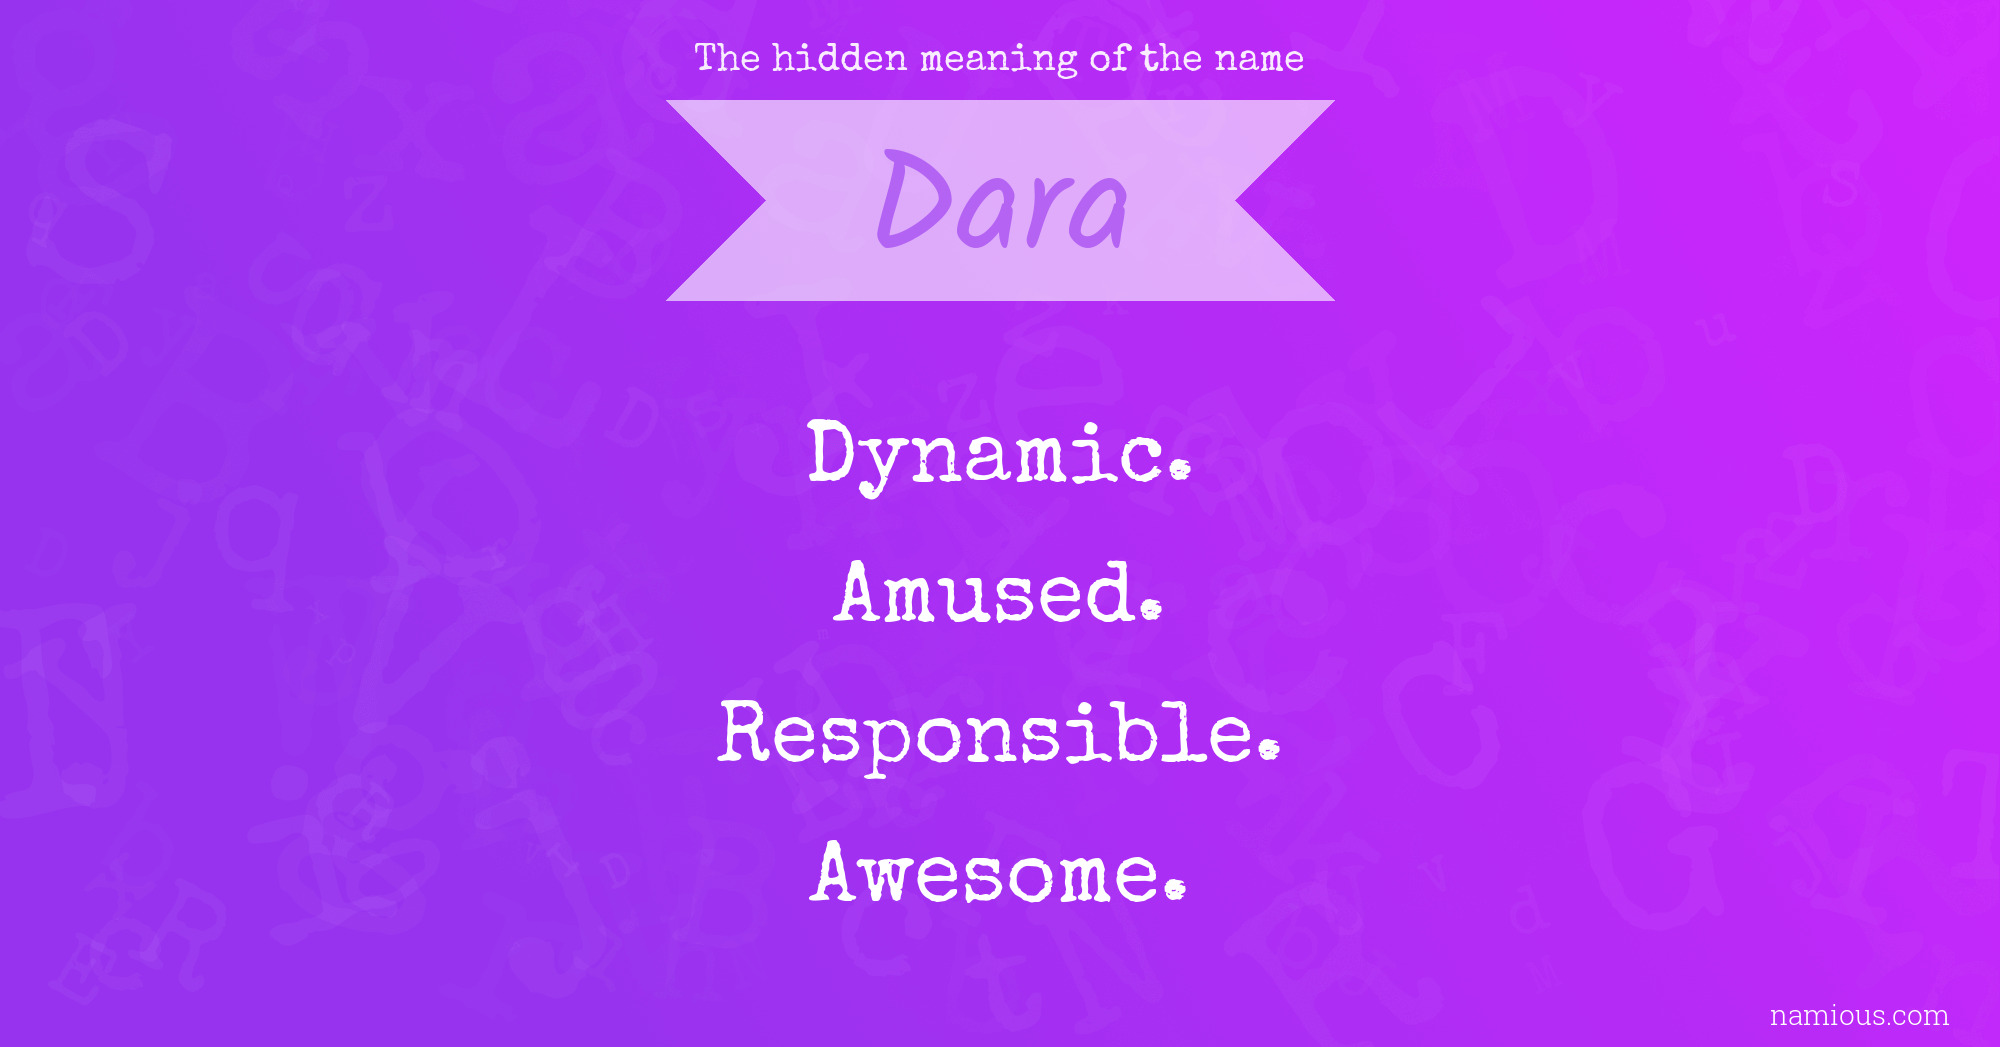 The hidden meaning of the name Dara